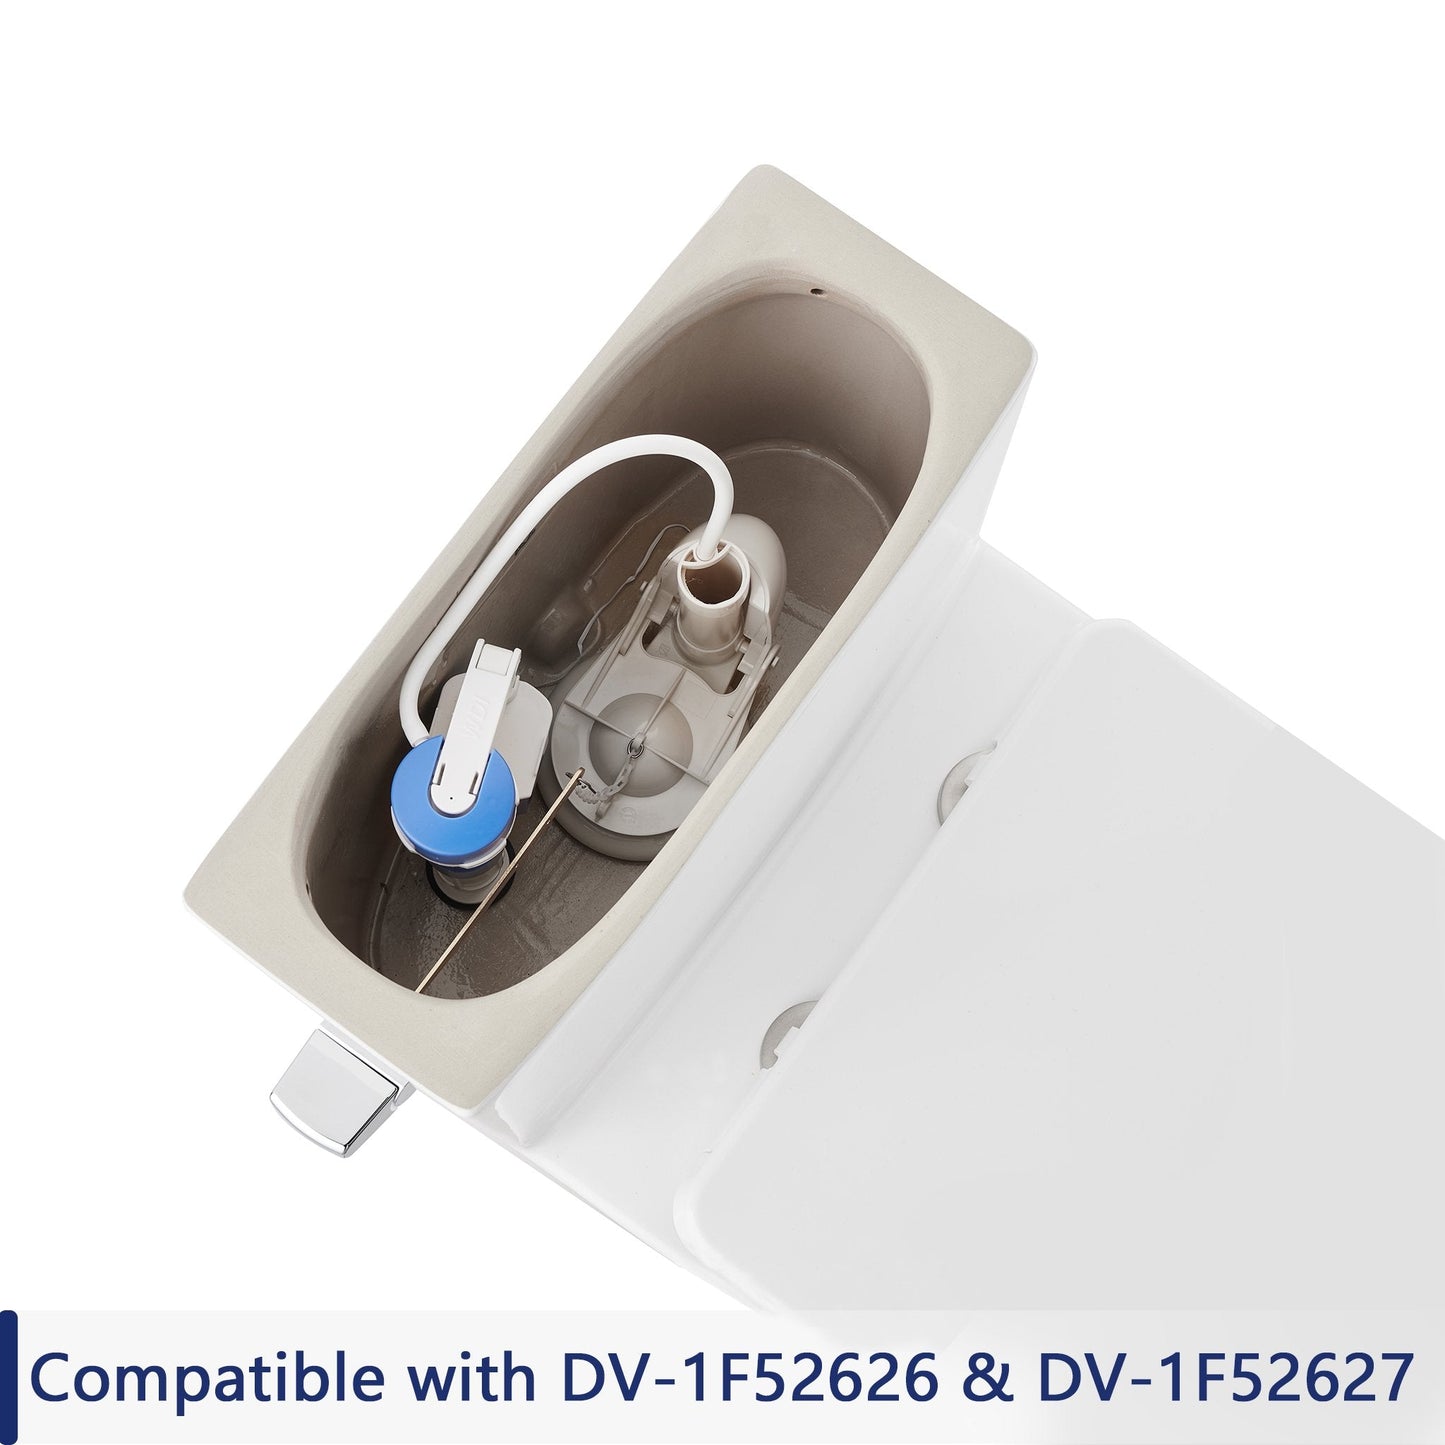 DeerValley Fill Valve (Fit with DV-1F52626 and DV-1F52627)